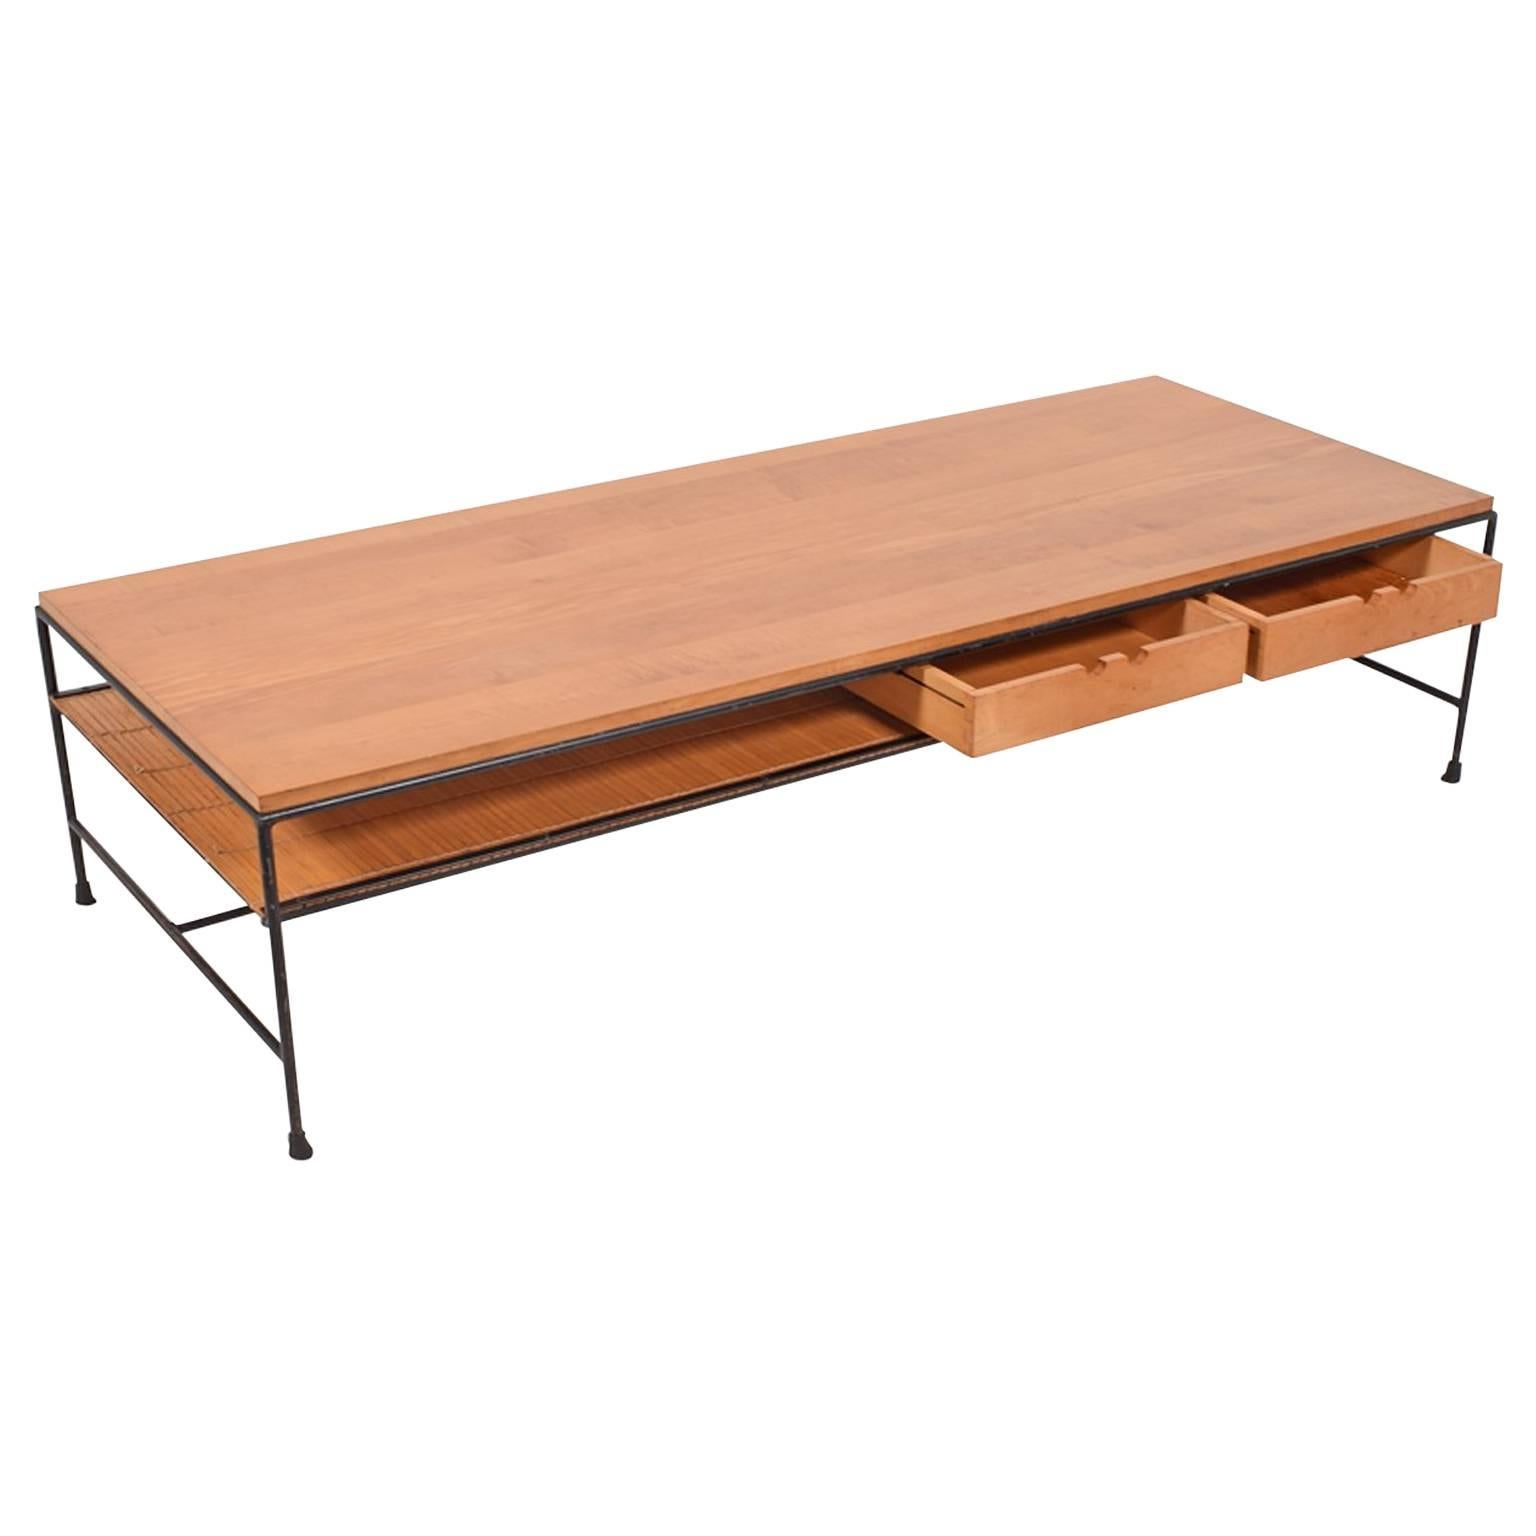 Paul McCobb Large Coffee Table Planer Group